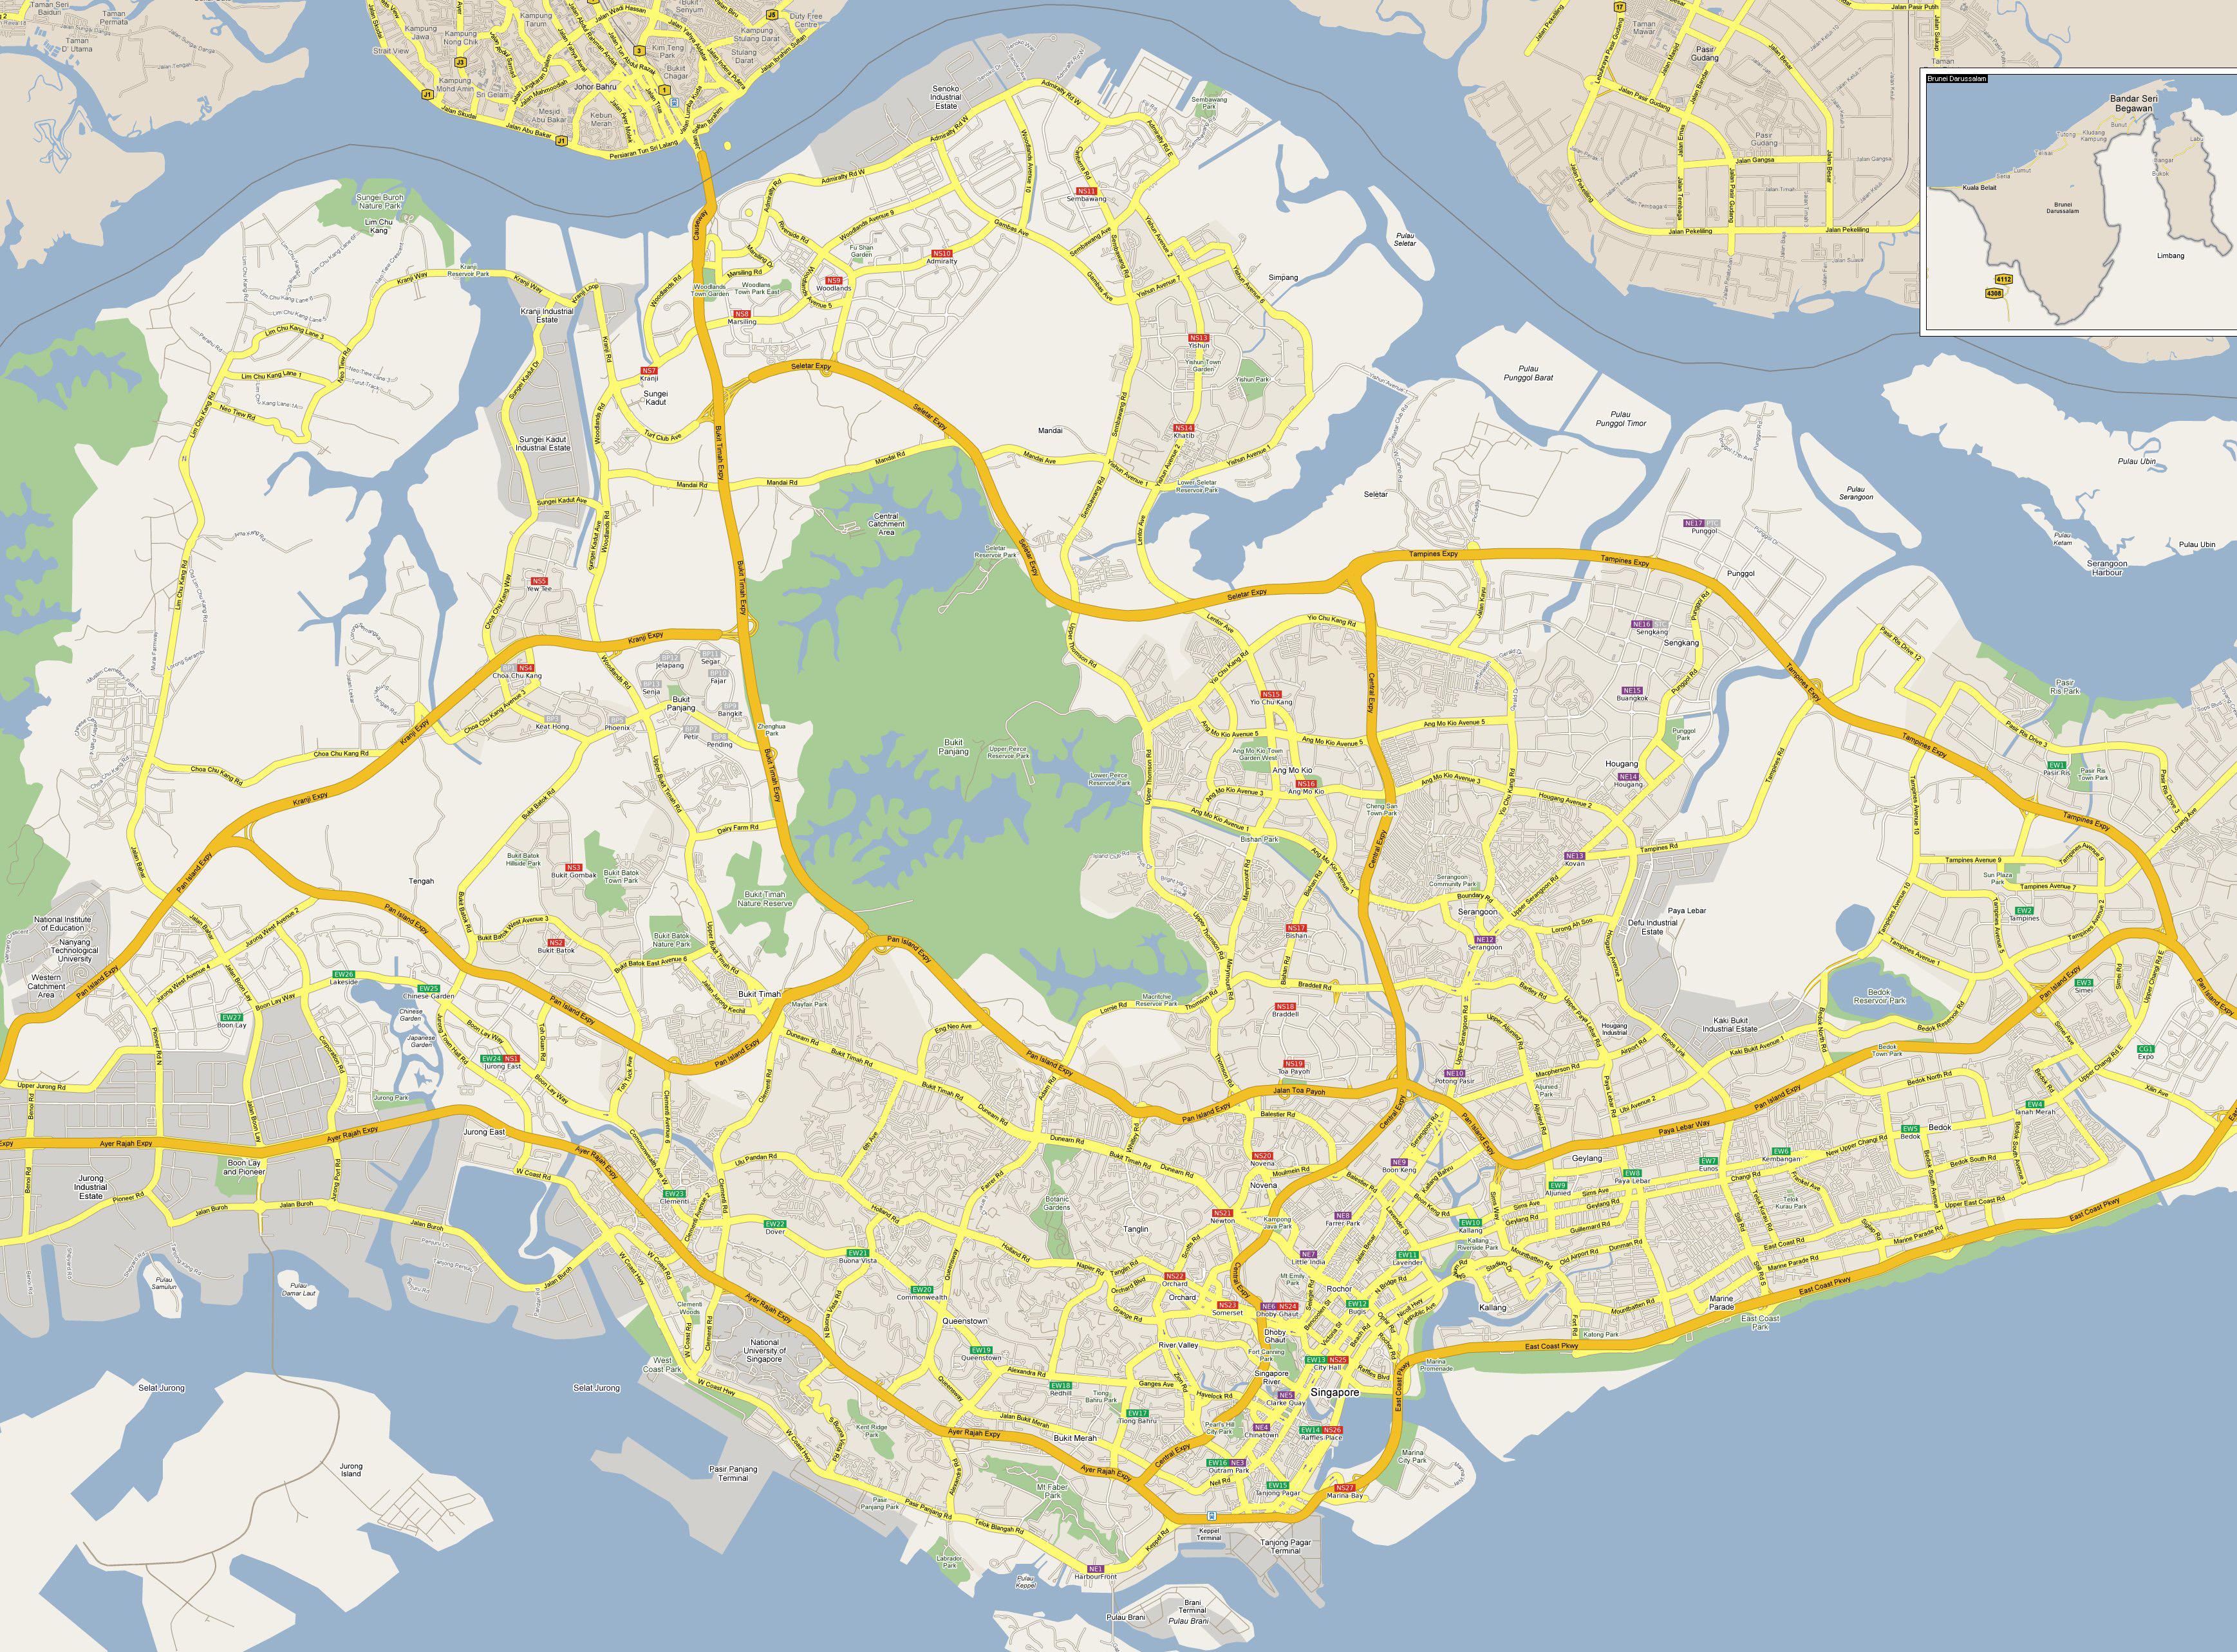 Map Of Singapore With Street Names Maps Of The World | Images and ...